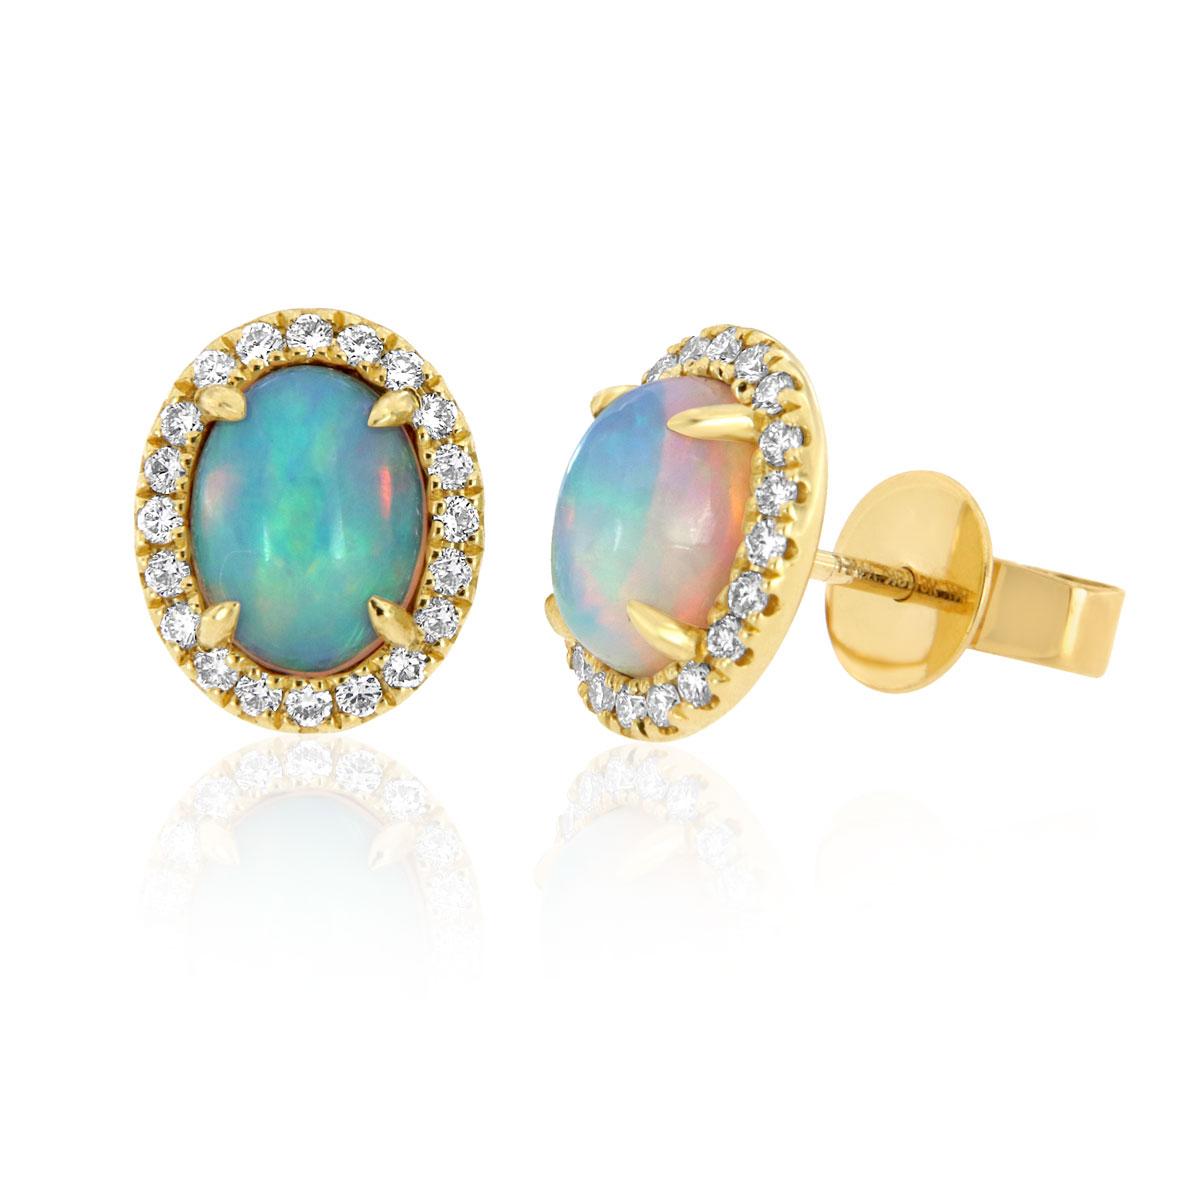 These colorful opal and diamond earrings feature two perfectly matched Oval opal framed by Micro prong round brilliant diamonds in 18k yellow gold. Experience the Difference!

Product details: 

Center Gemstone Type: Opal
Center Gemstone Carat